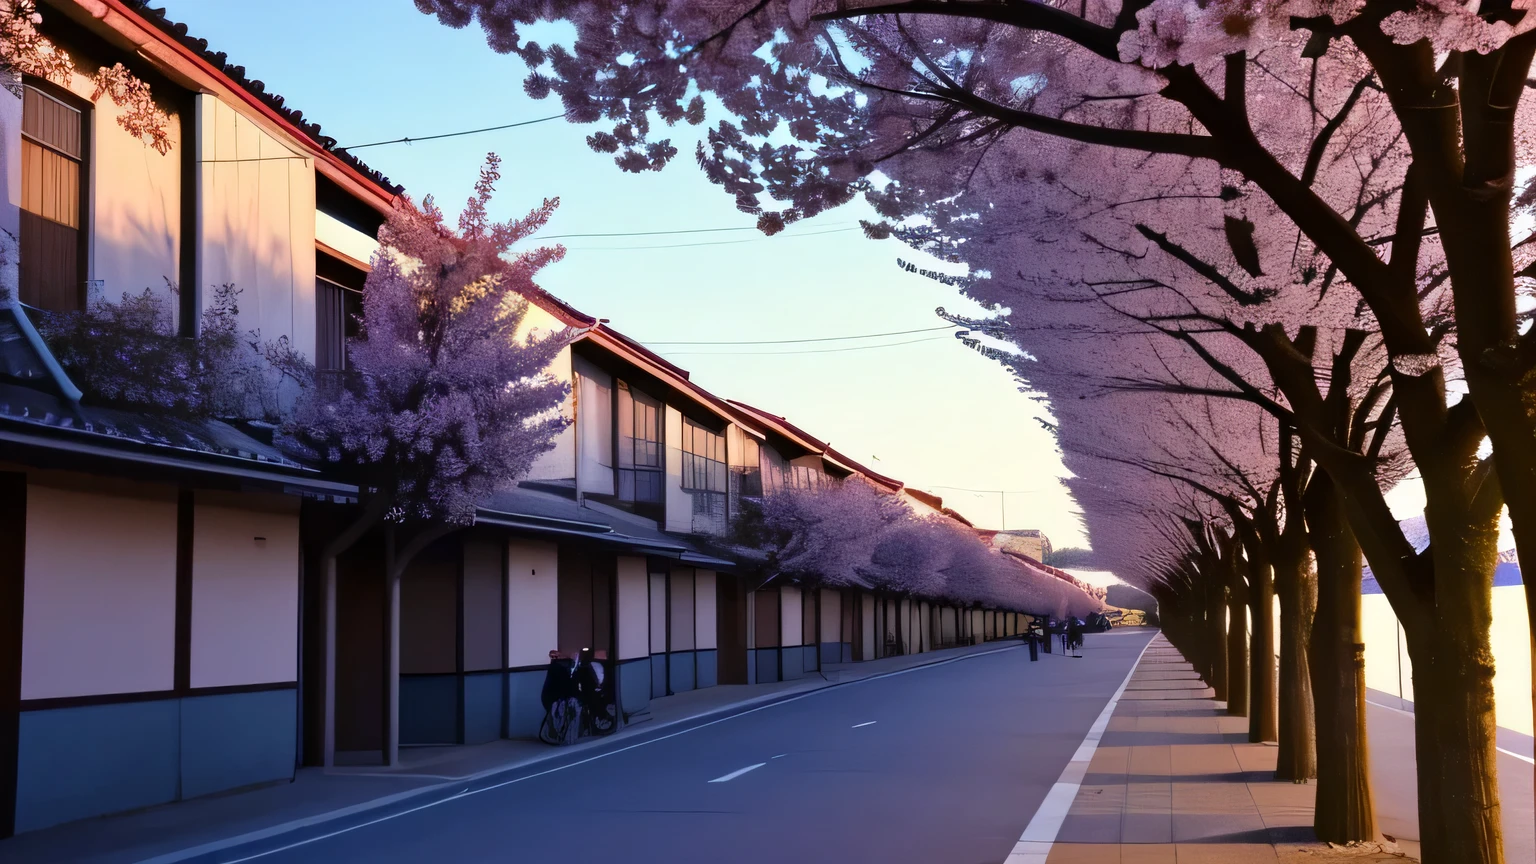 A row of cherry blossom trees in full bloom crowded with office workers going to work and students going to school, The shadow is long, Morning light, the sun is low